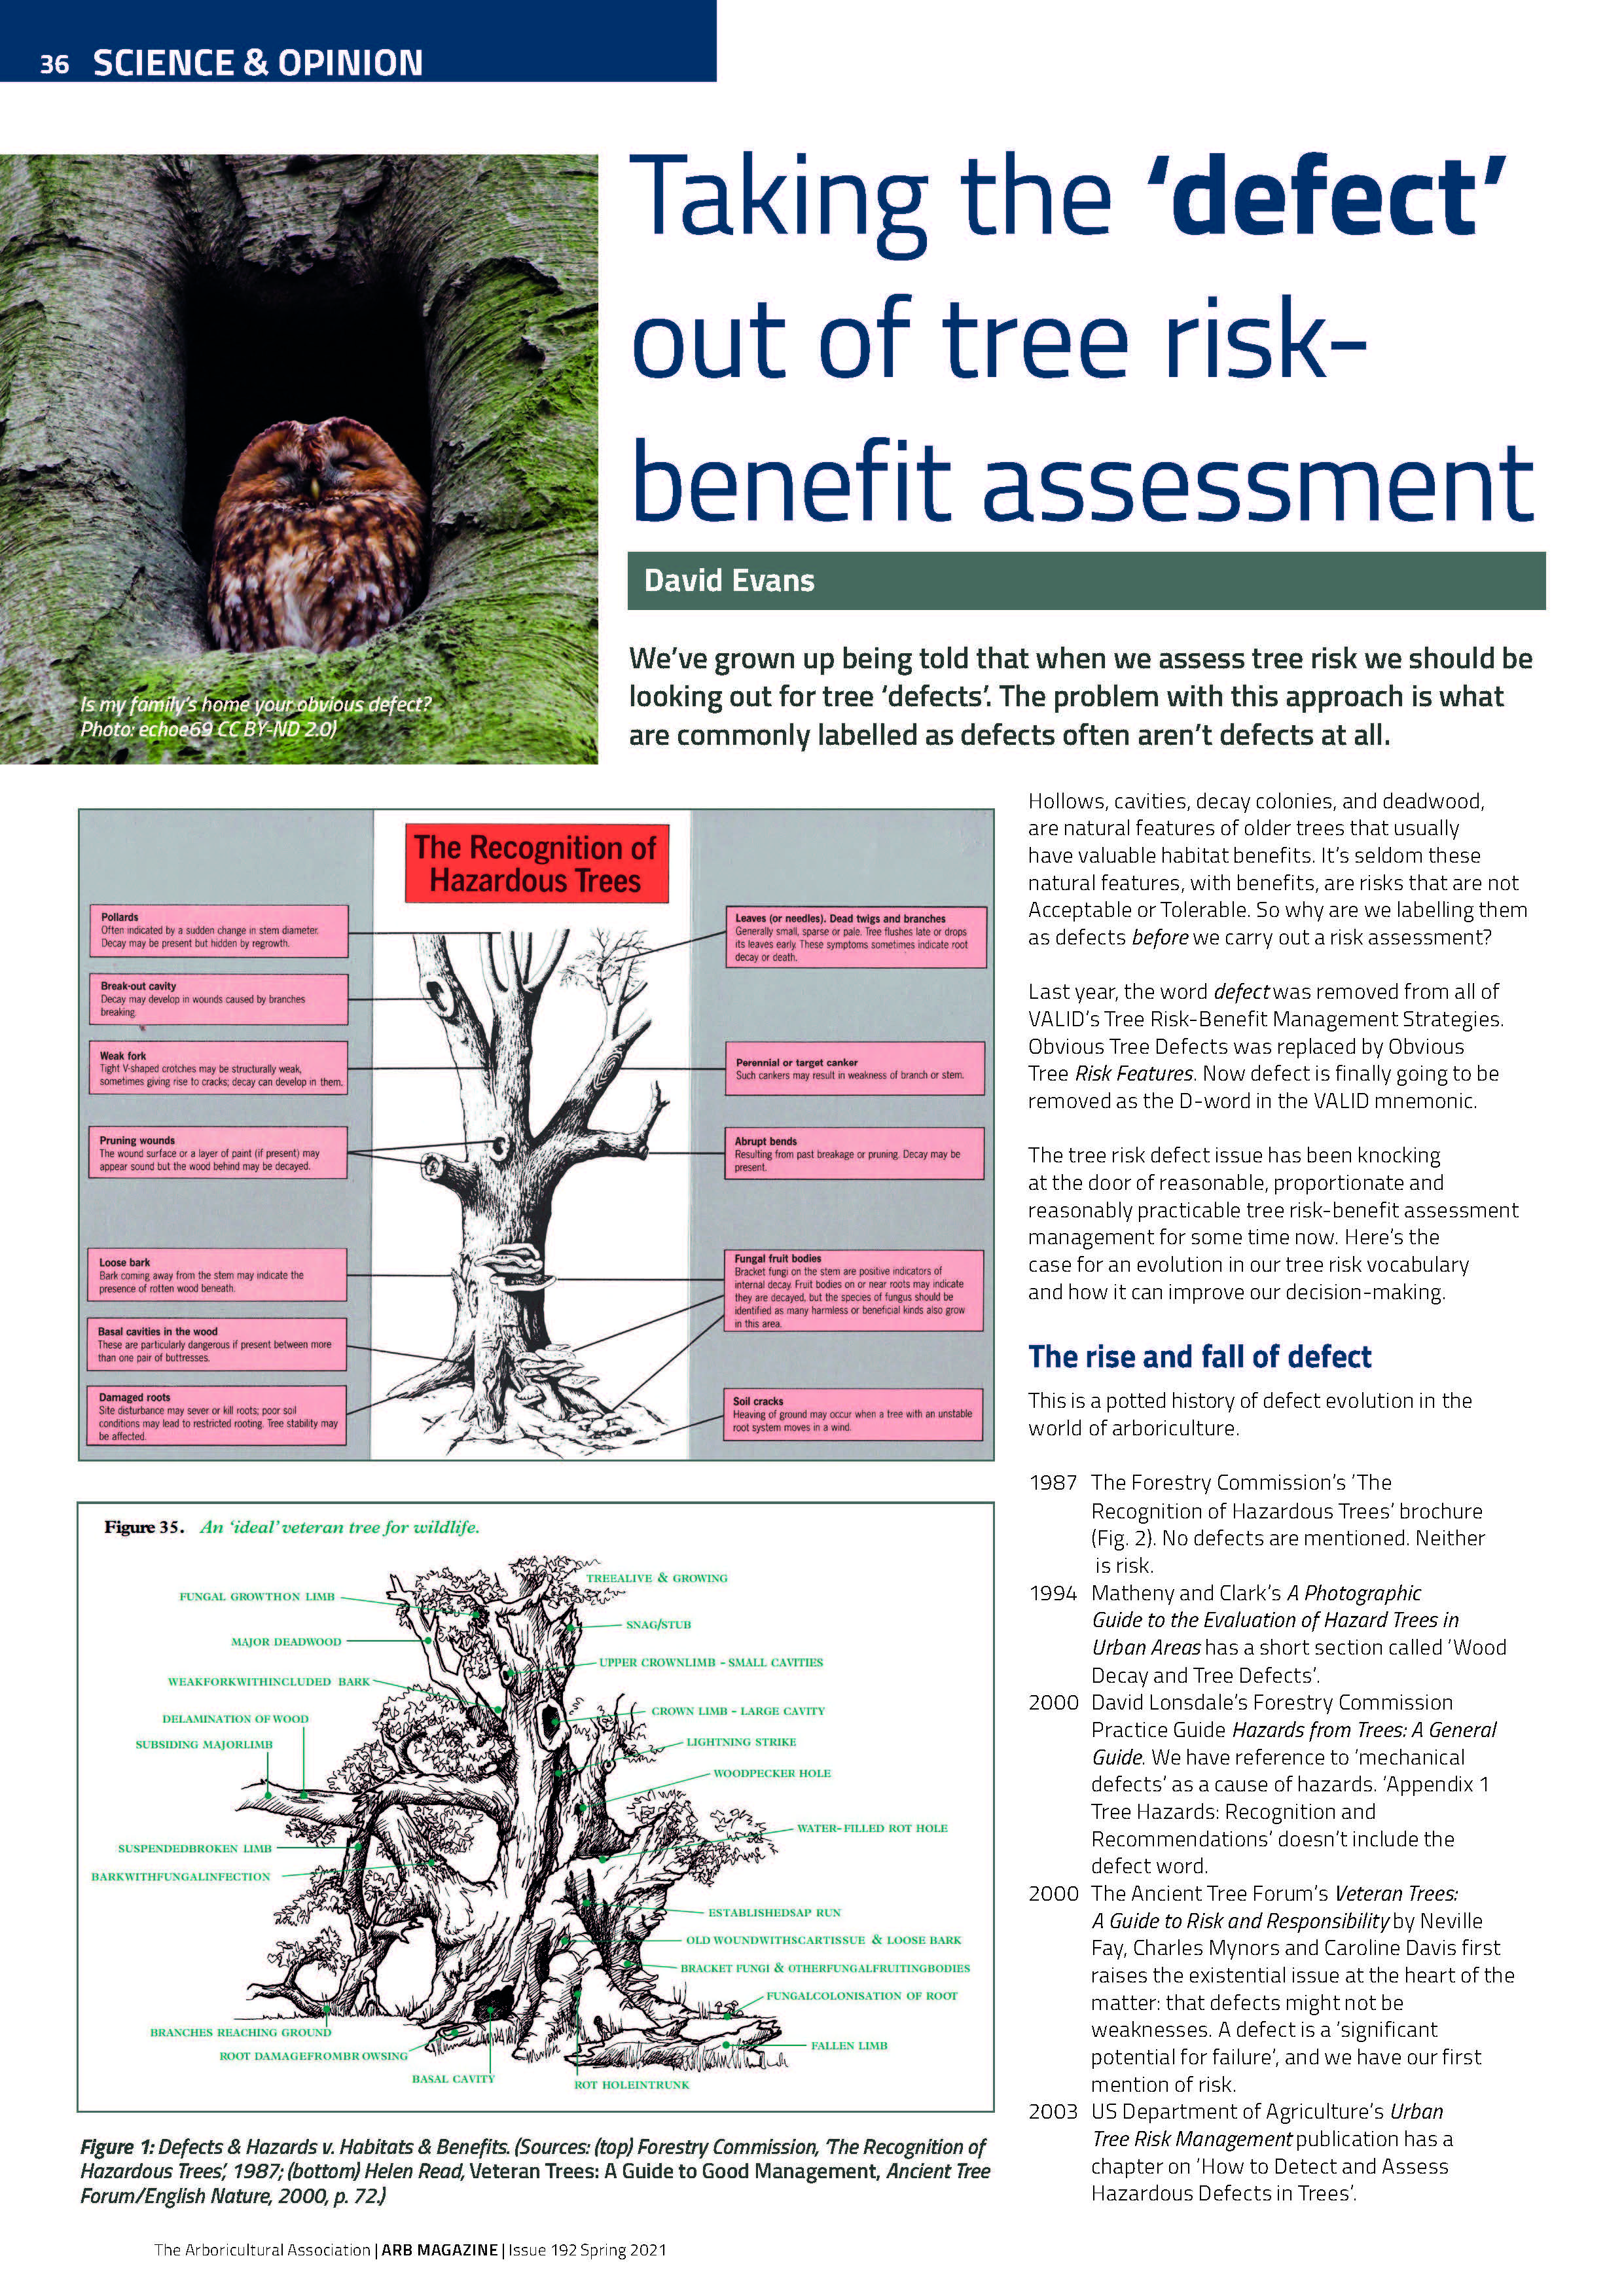 Tree risk defects | Taking the defect out of tree risk-benefit assessment